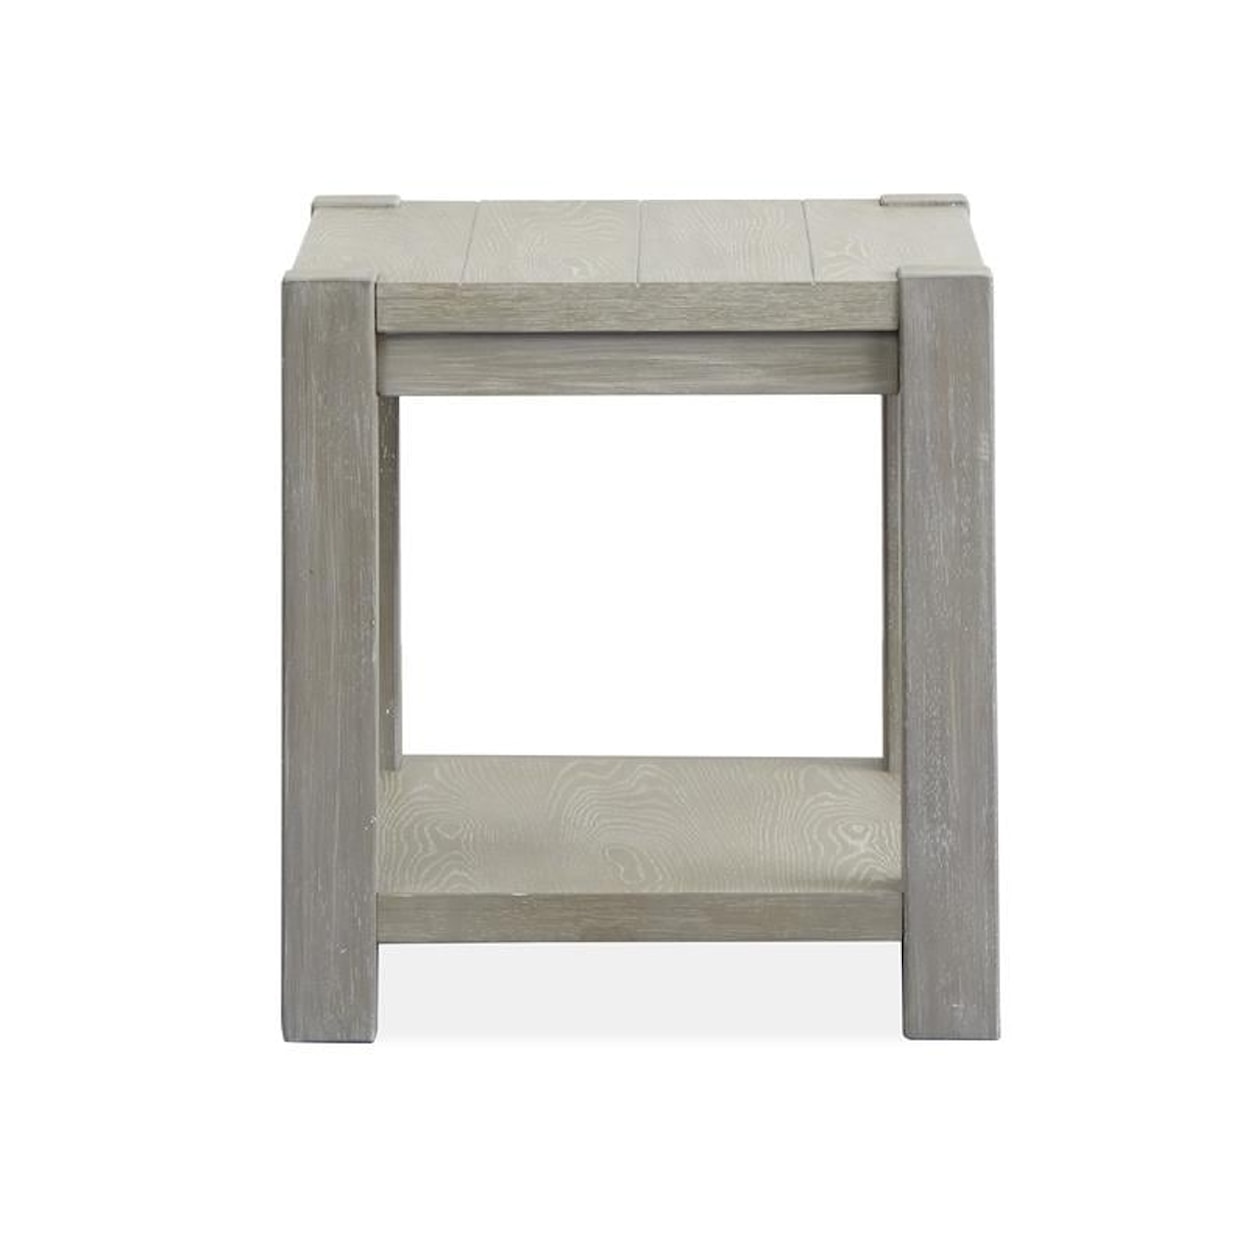 Magnussen Home Burgess Occasional Tables Rectangular End Table